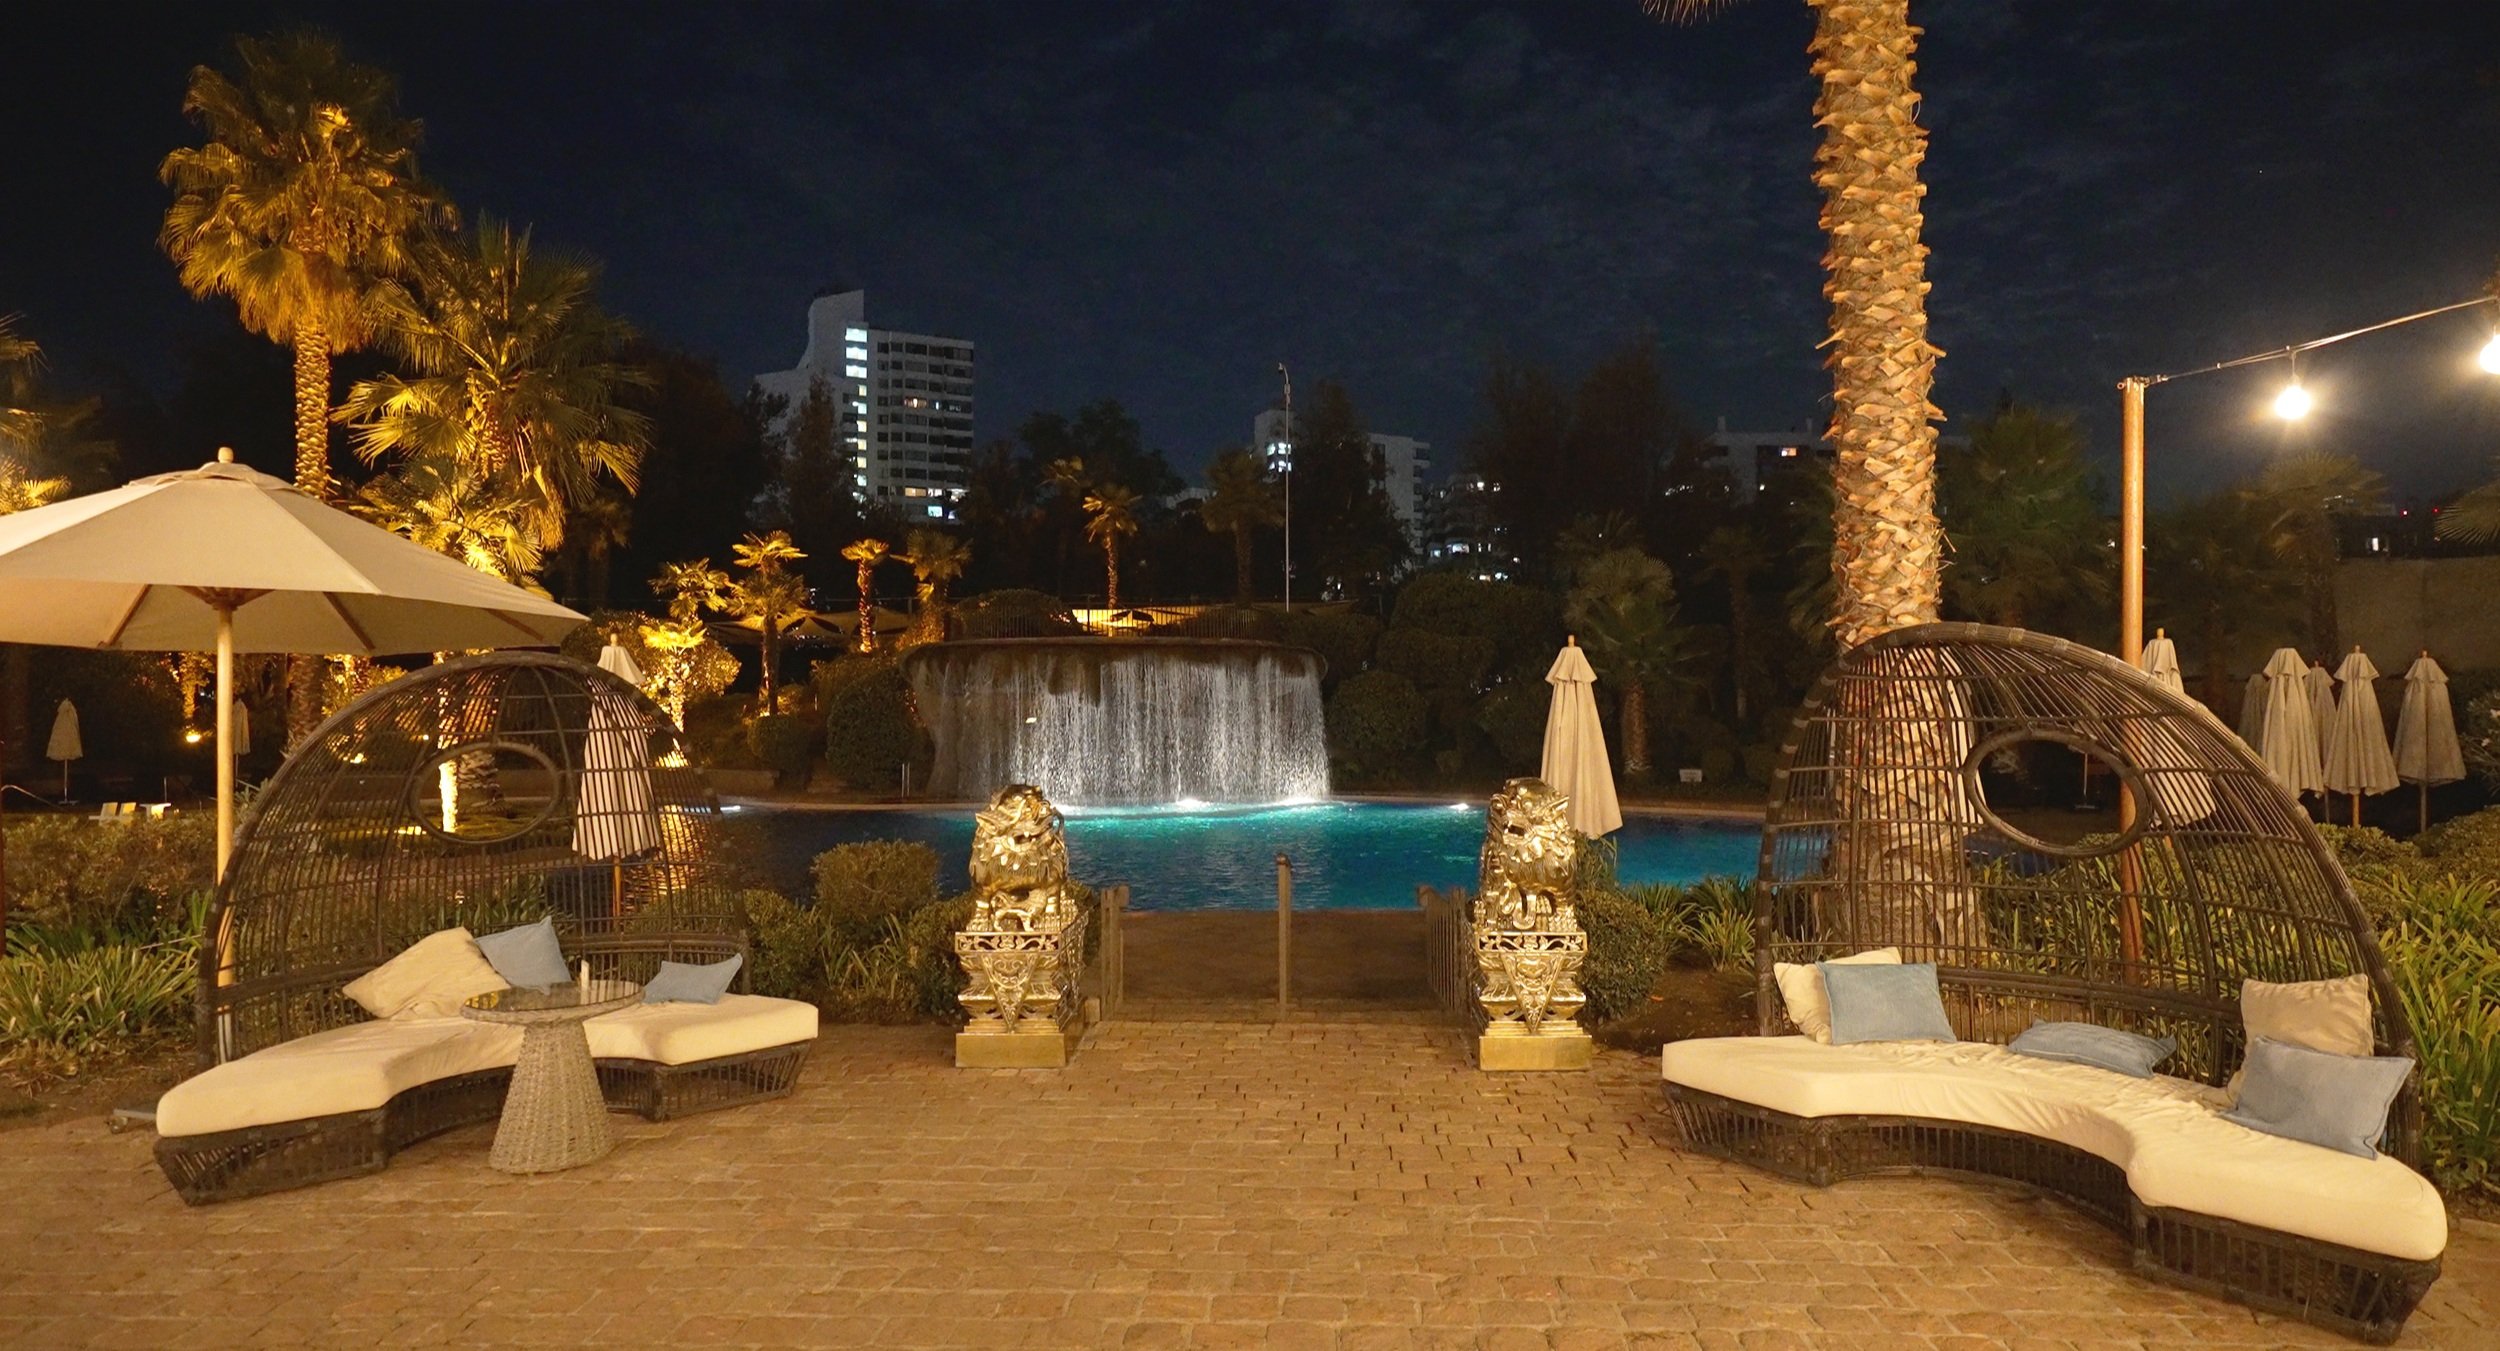 The terrace and pool at night